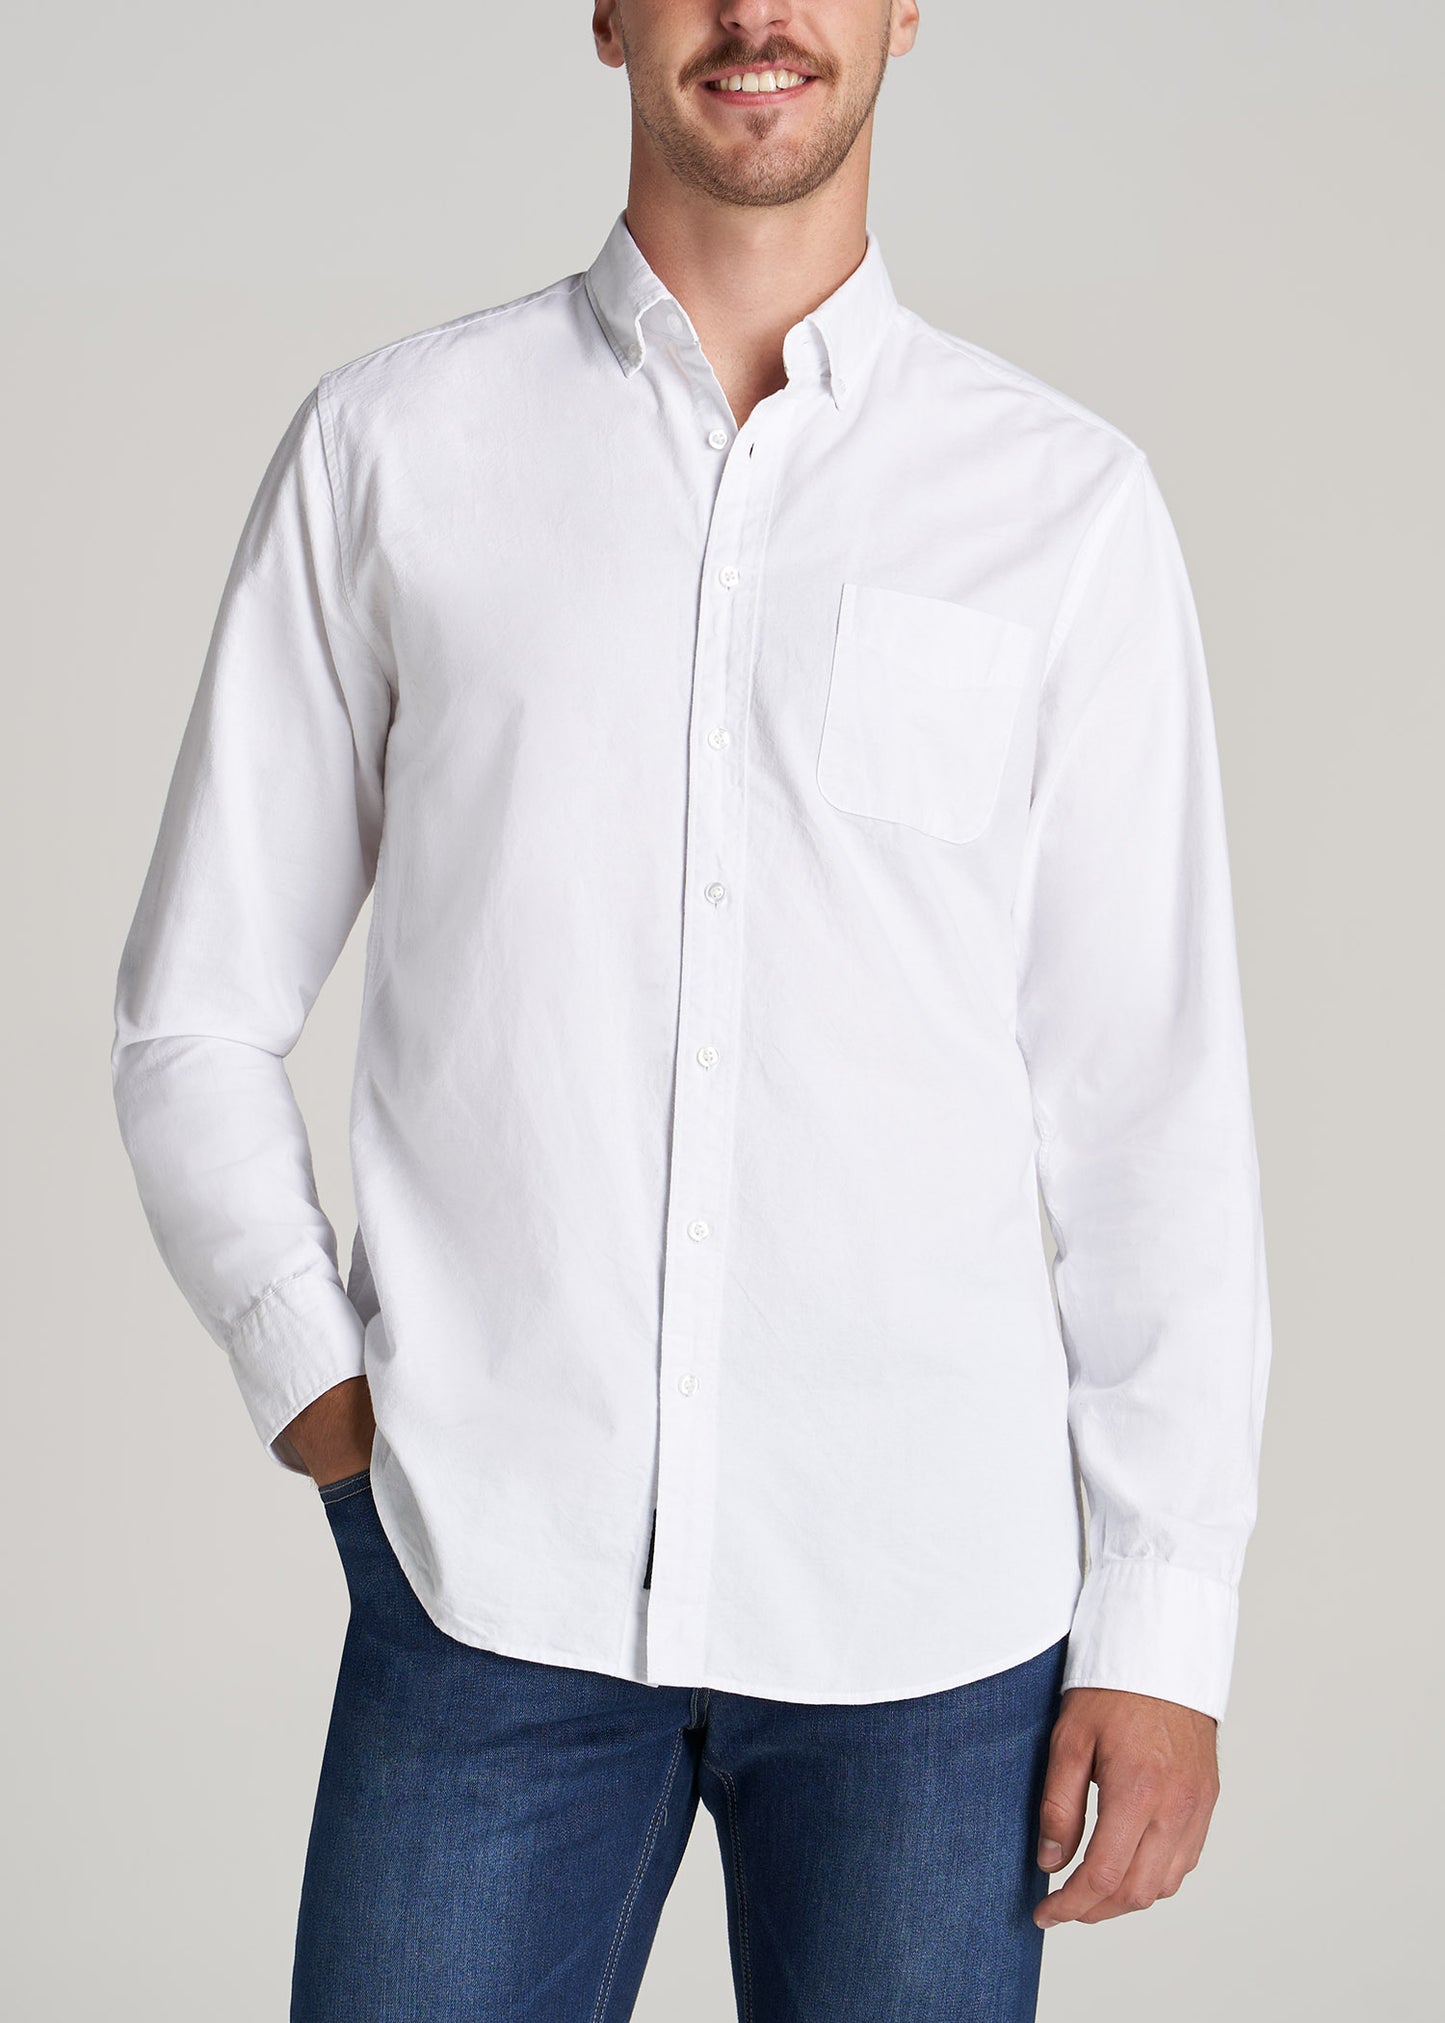       American-Tall-Men-Vintage-Wash-Oxford-Shirt-Timber-White-front